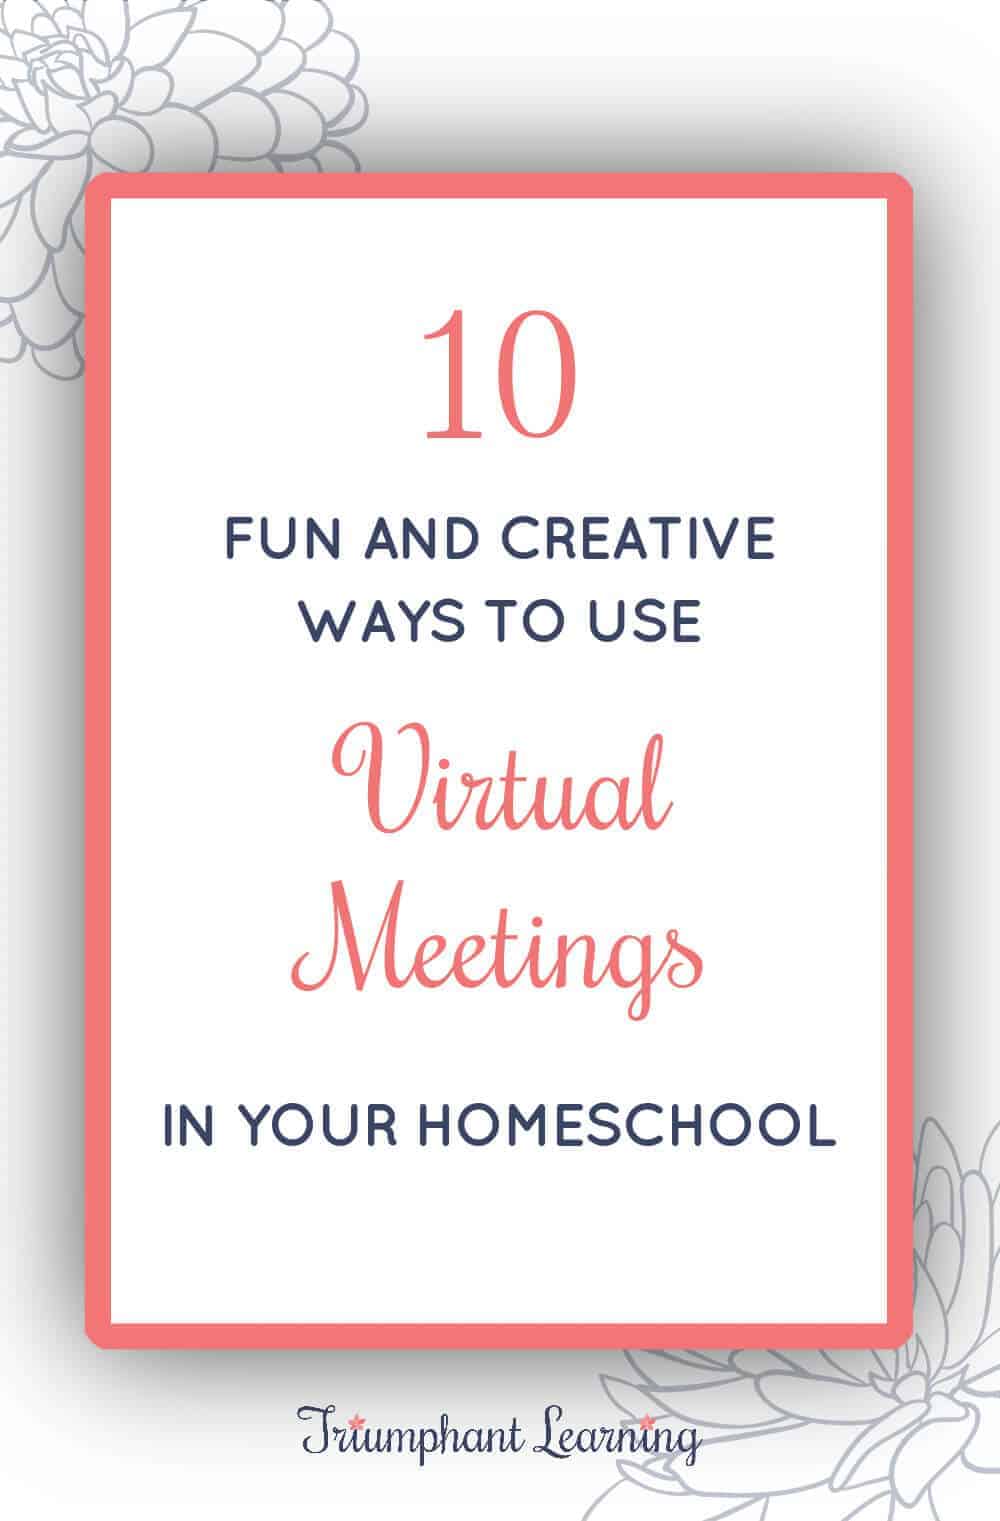 How can you use virtual meetings in your homeschool? Check out these fun & creative ways you can utilize virtual meetings in your homeschool. via @TriLearning